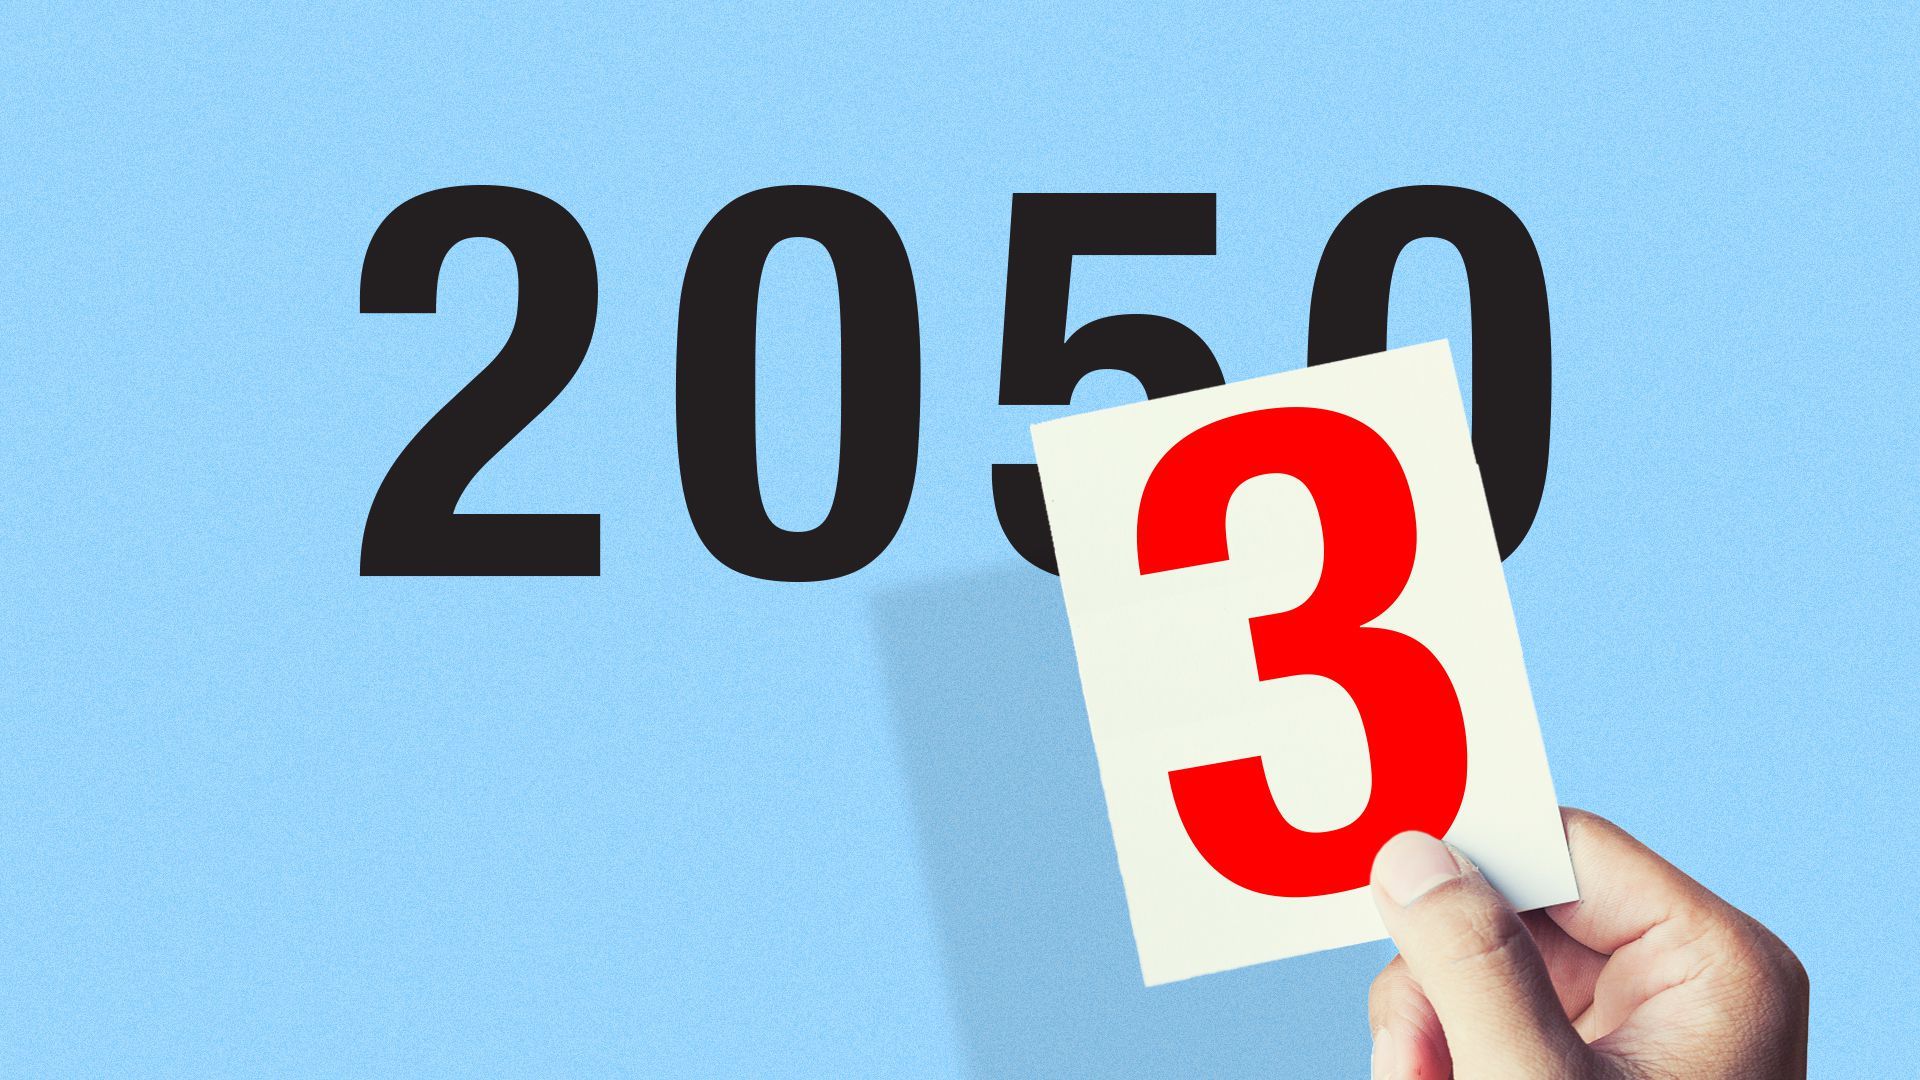 Illustration of a hand placing a number three card over the number 2050